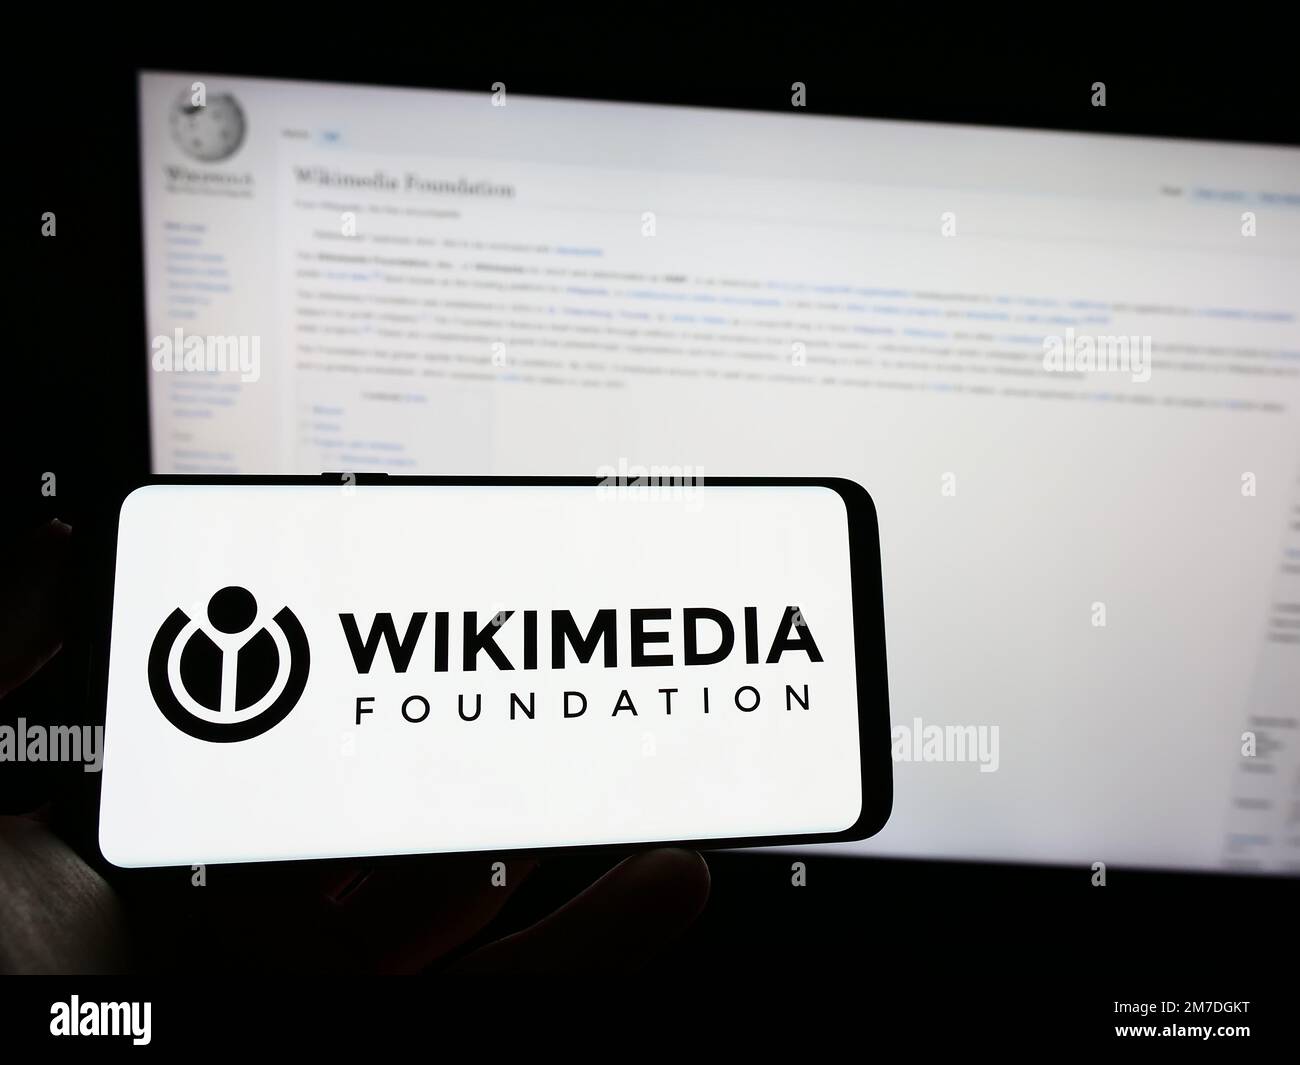 Person holding mobile phone with logo of Wikimedia Foundation Inc. on screen in front of Wikipedia web page. Focus on phone display. Stock Photo